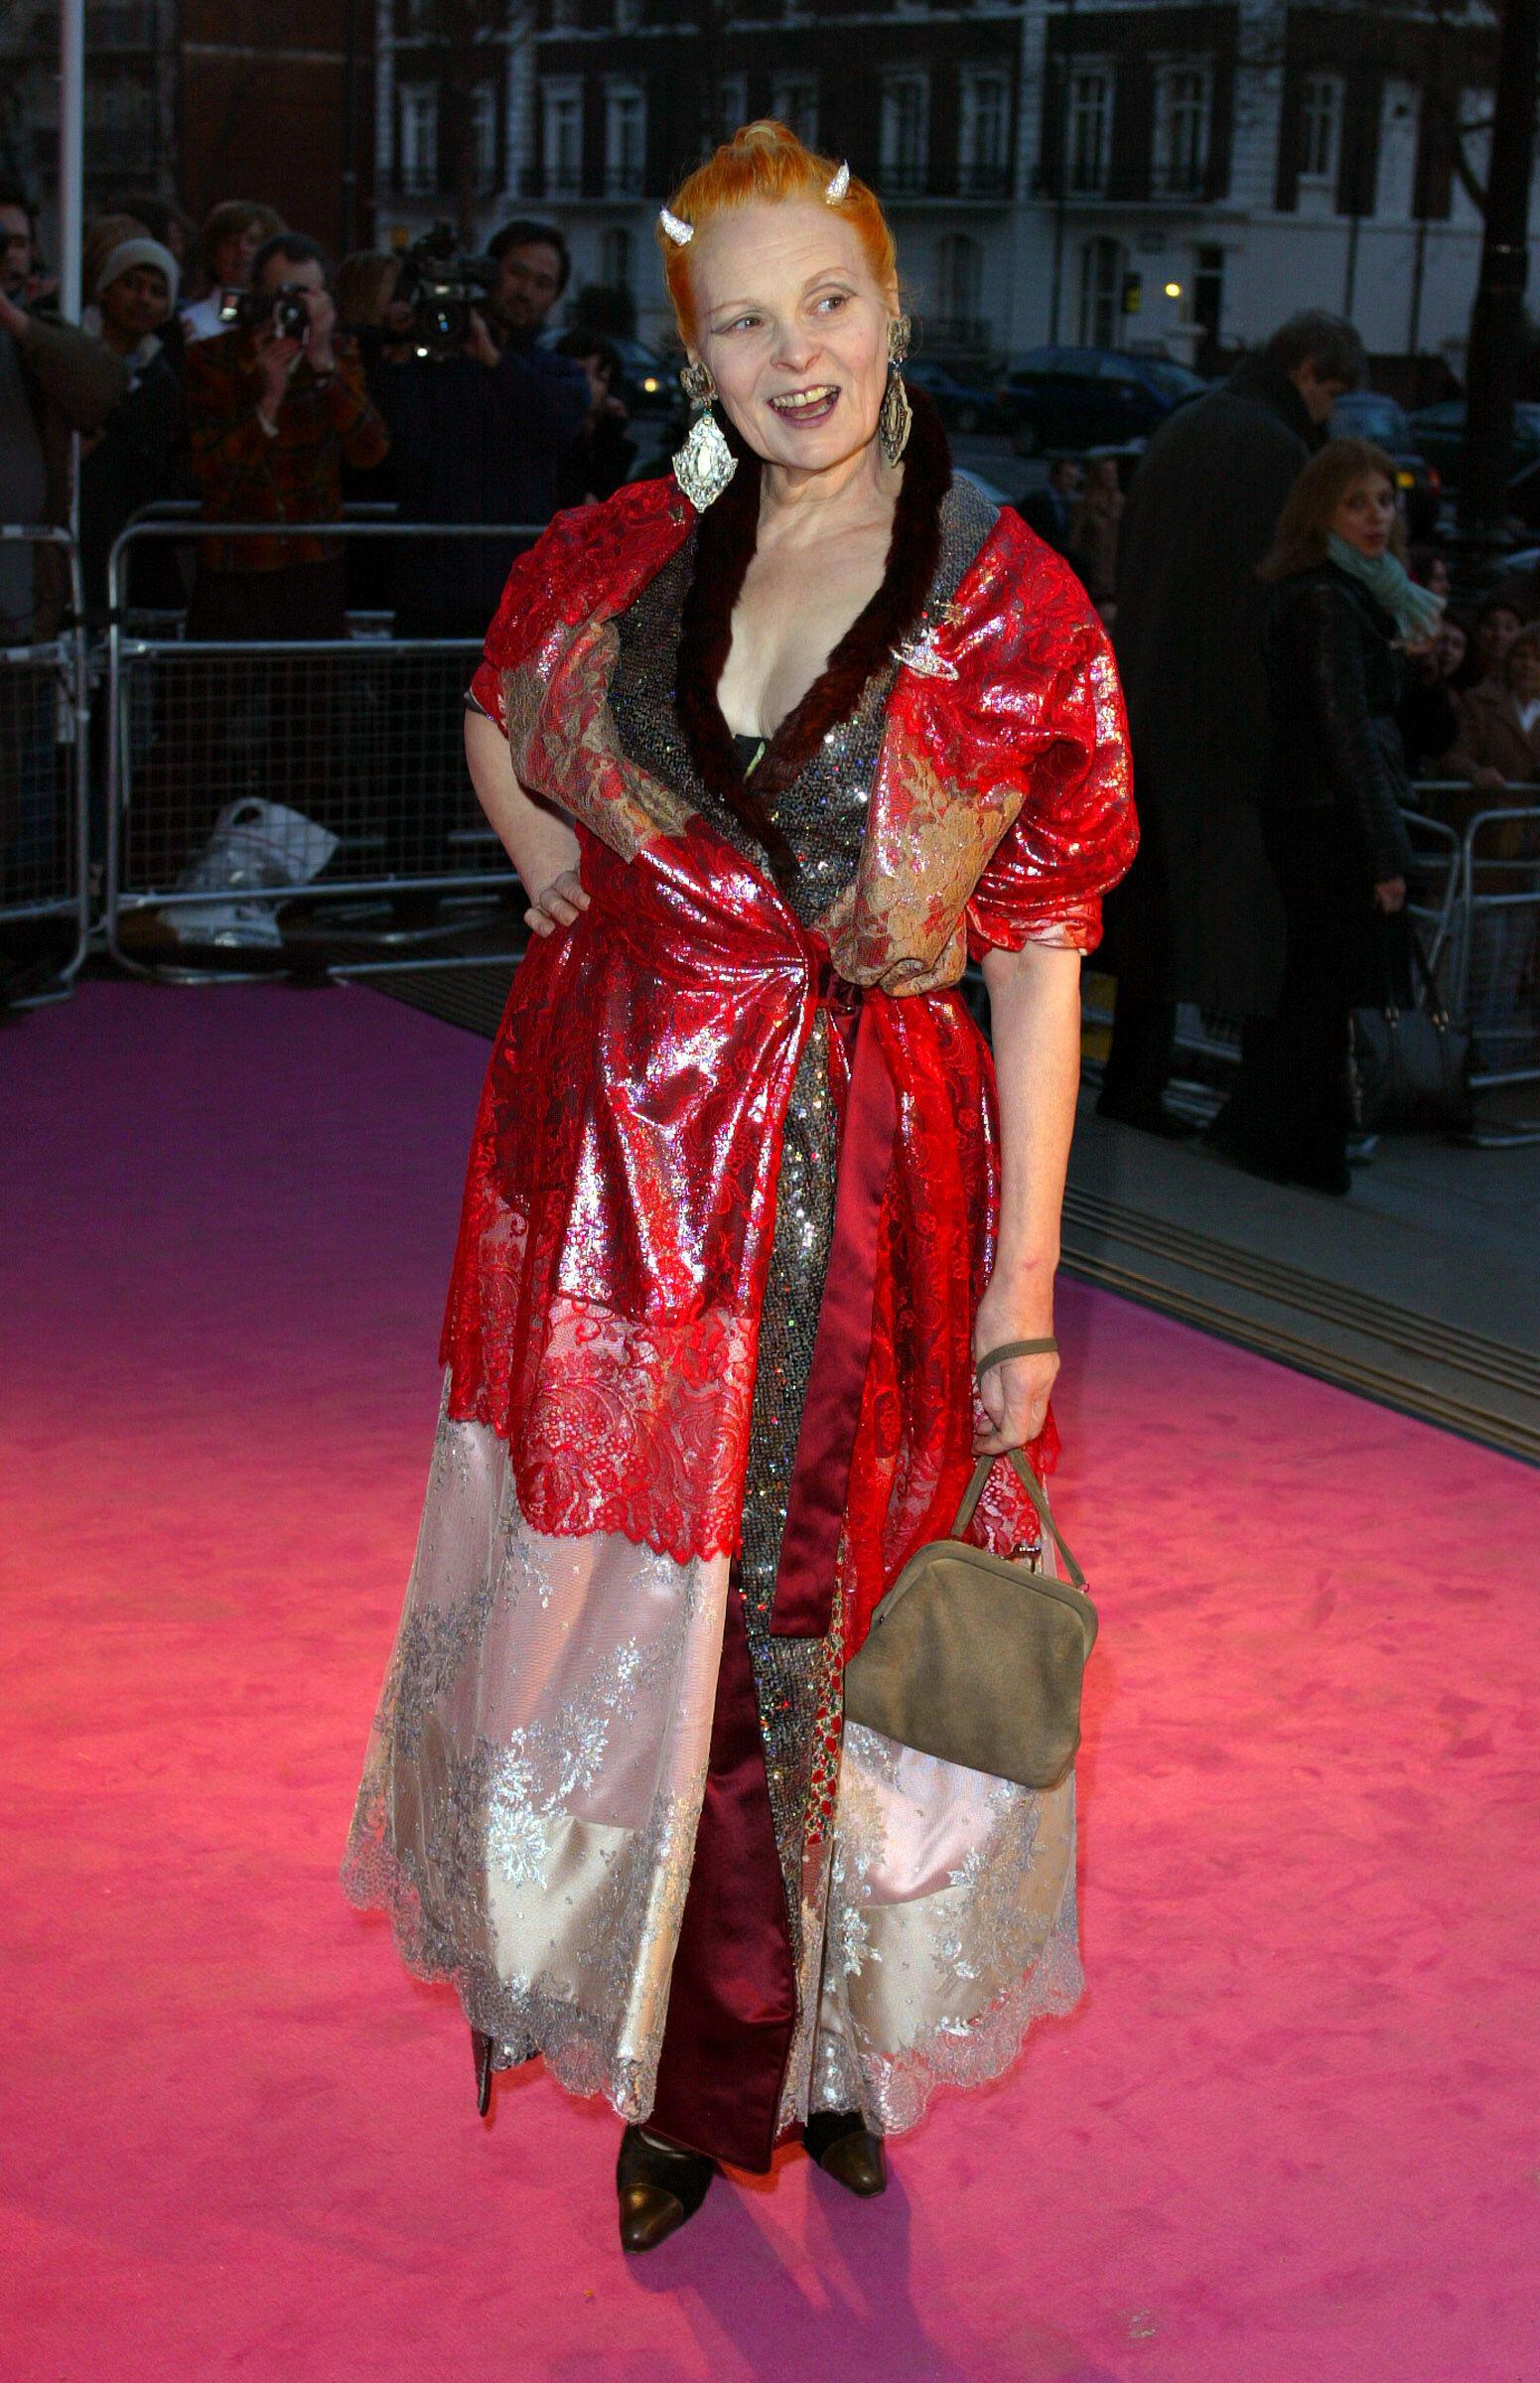 Vivienne Westwood at the opening of The Vivienne Westwood Exhibition at the V&A Museum